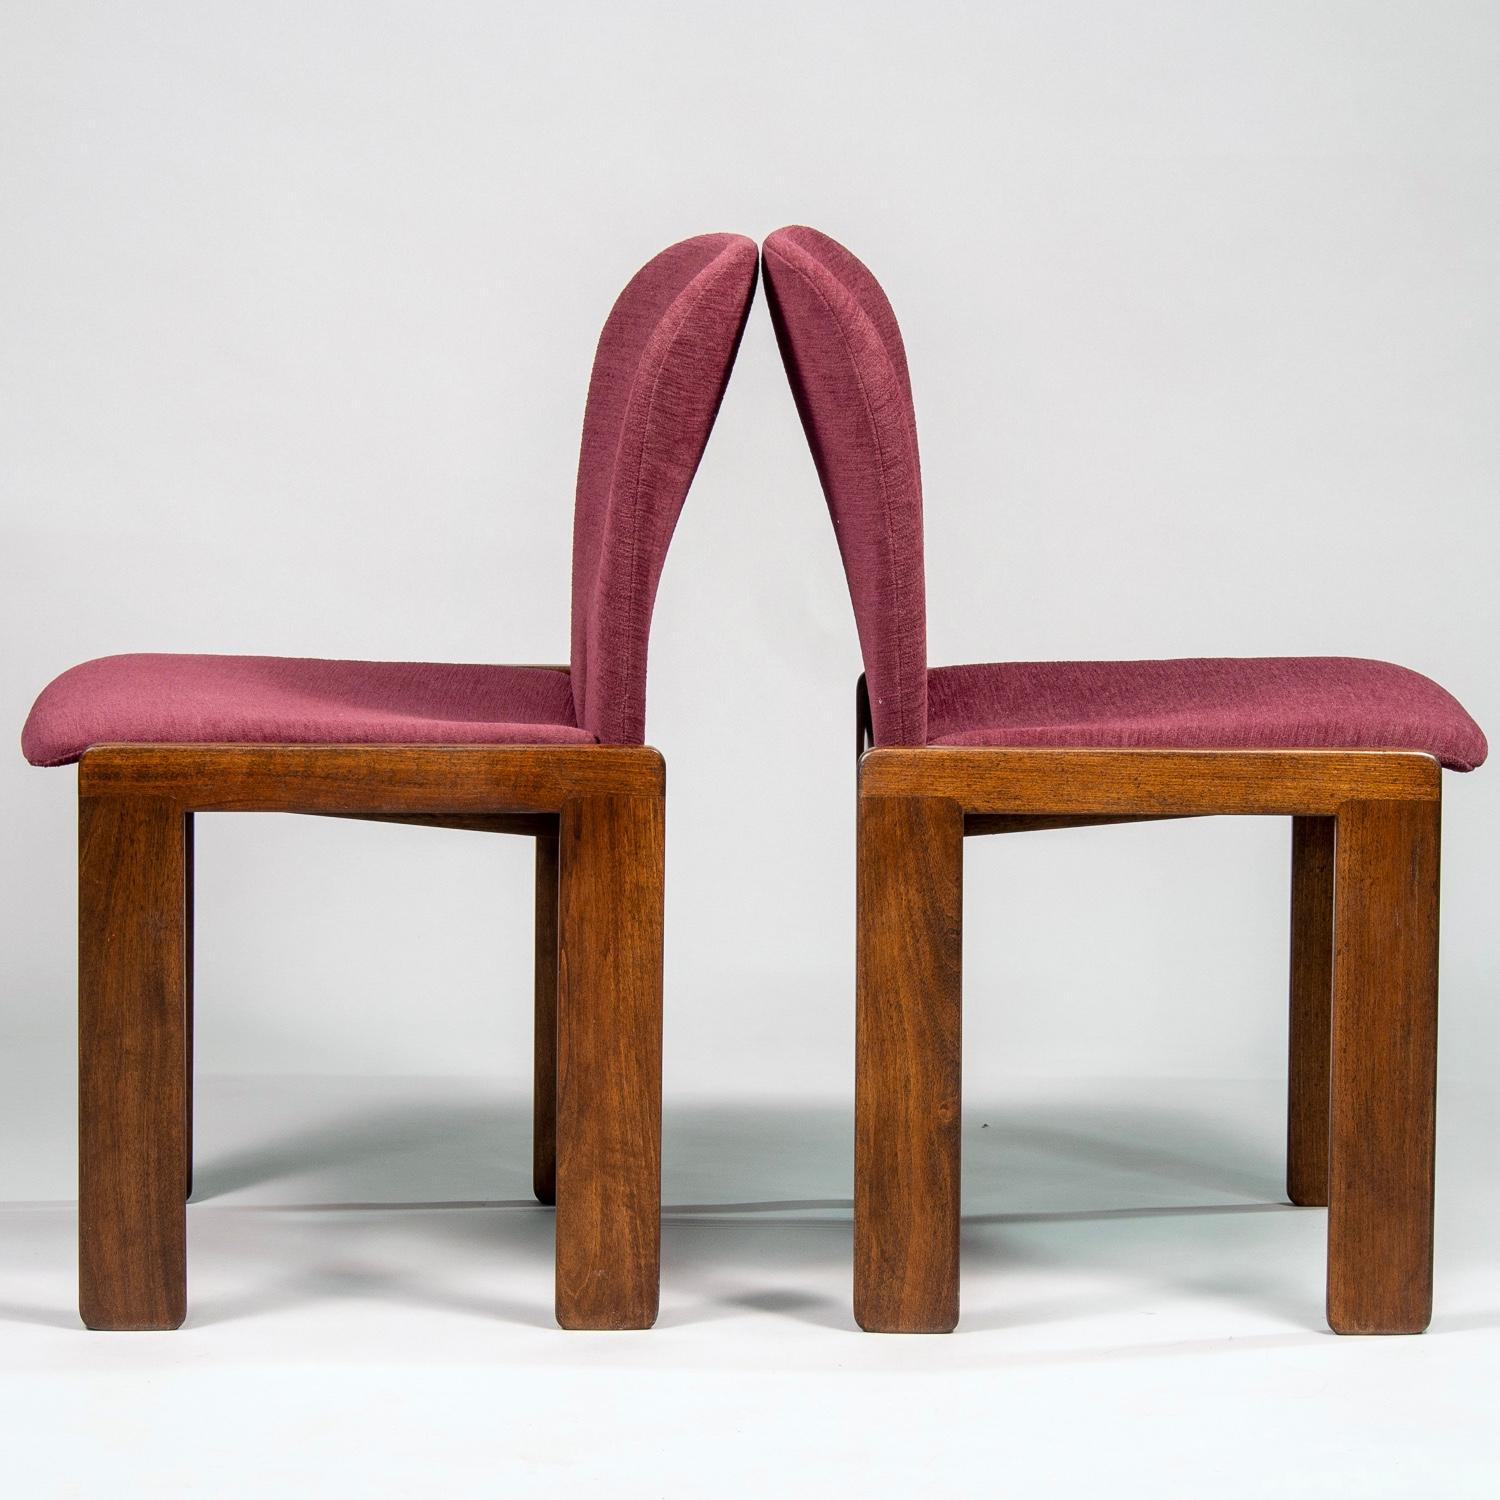 Italian Set of 8 Model 121 Chairs in Walnut by Afra and Tobia Scarpa for Cassina 